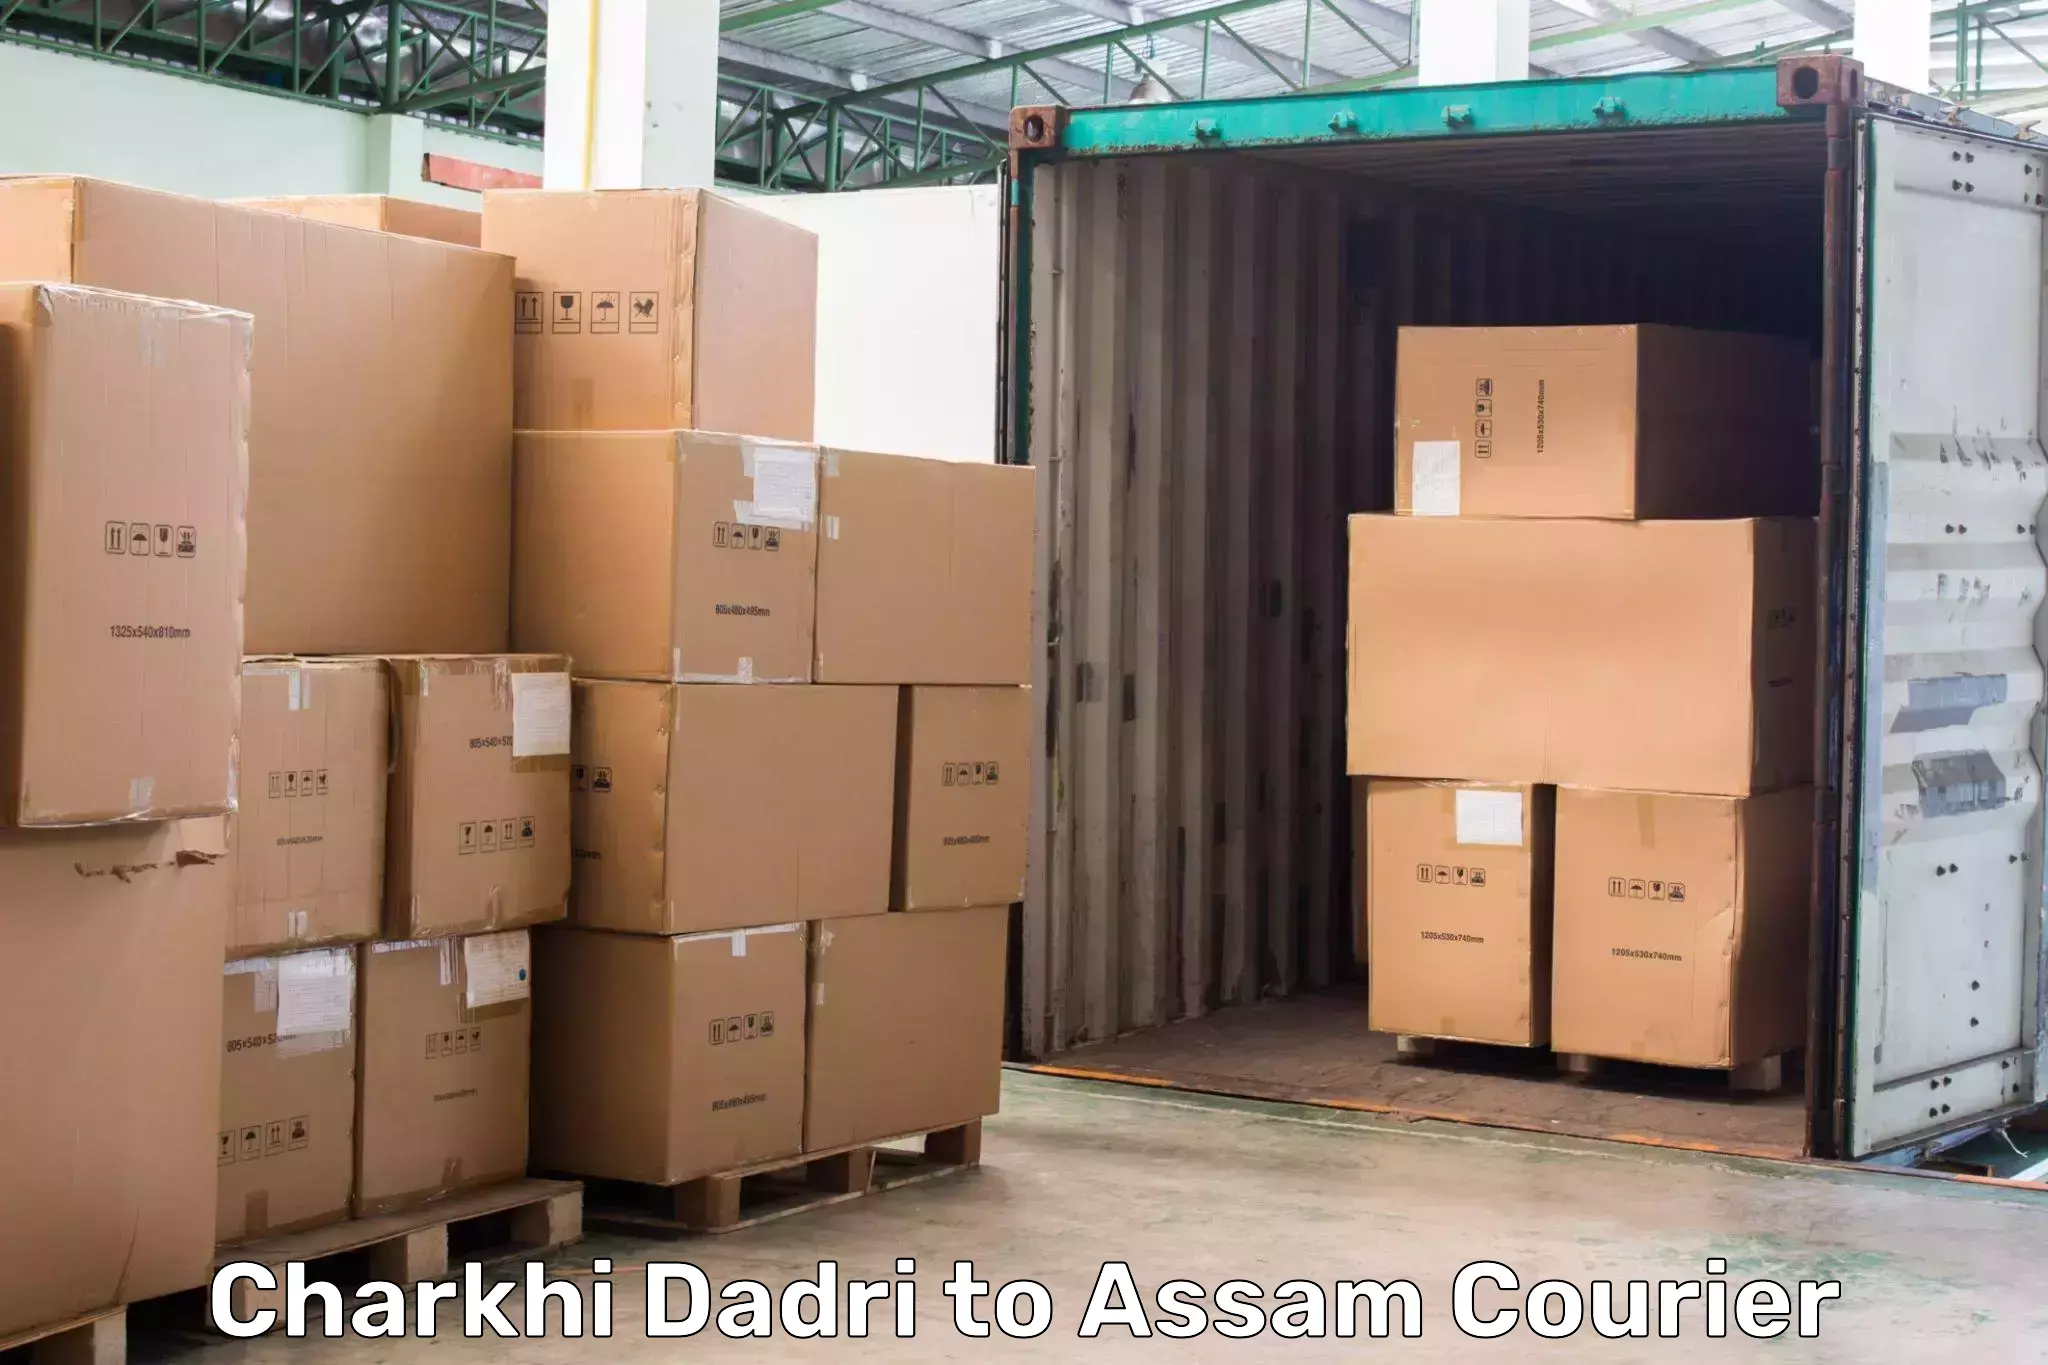 Scheduled delivery in Charkhi Dadri to Assam